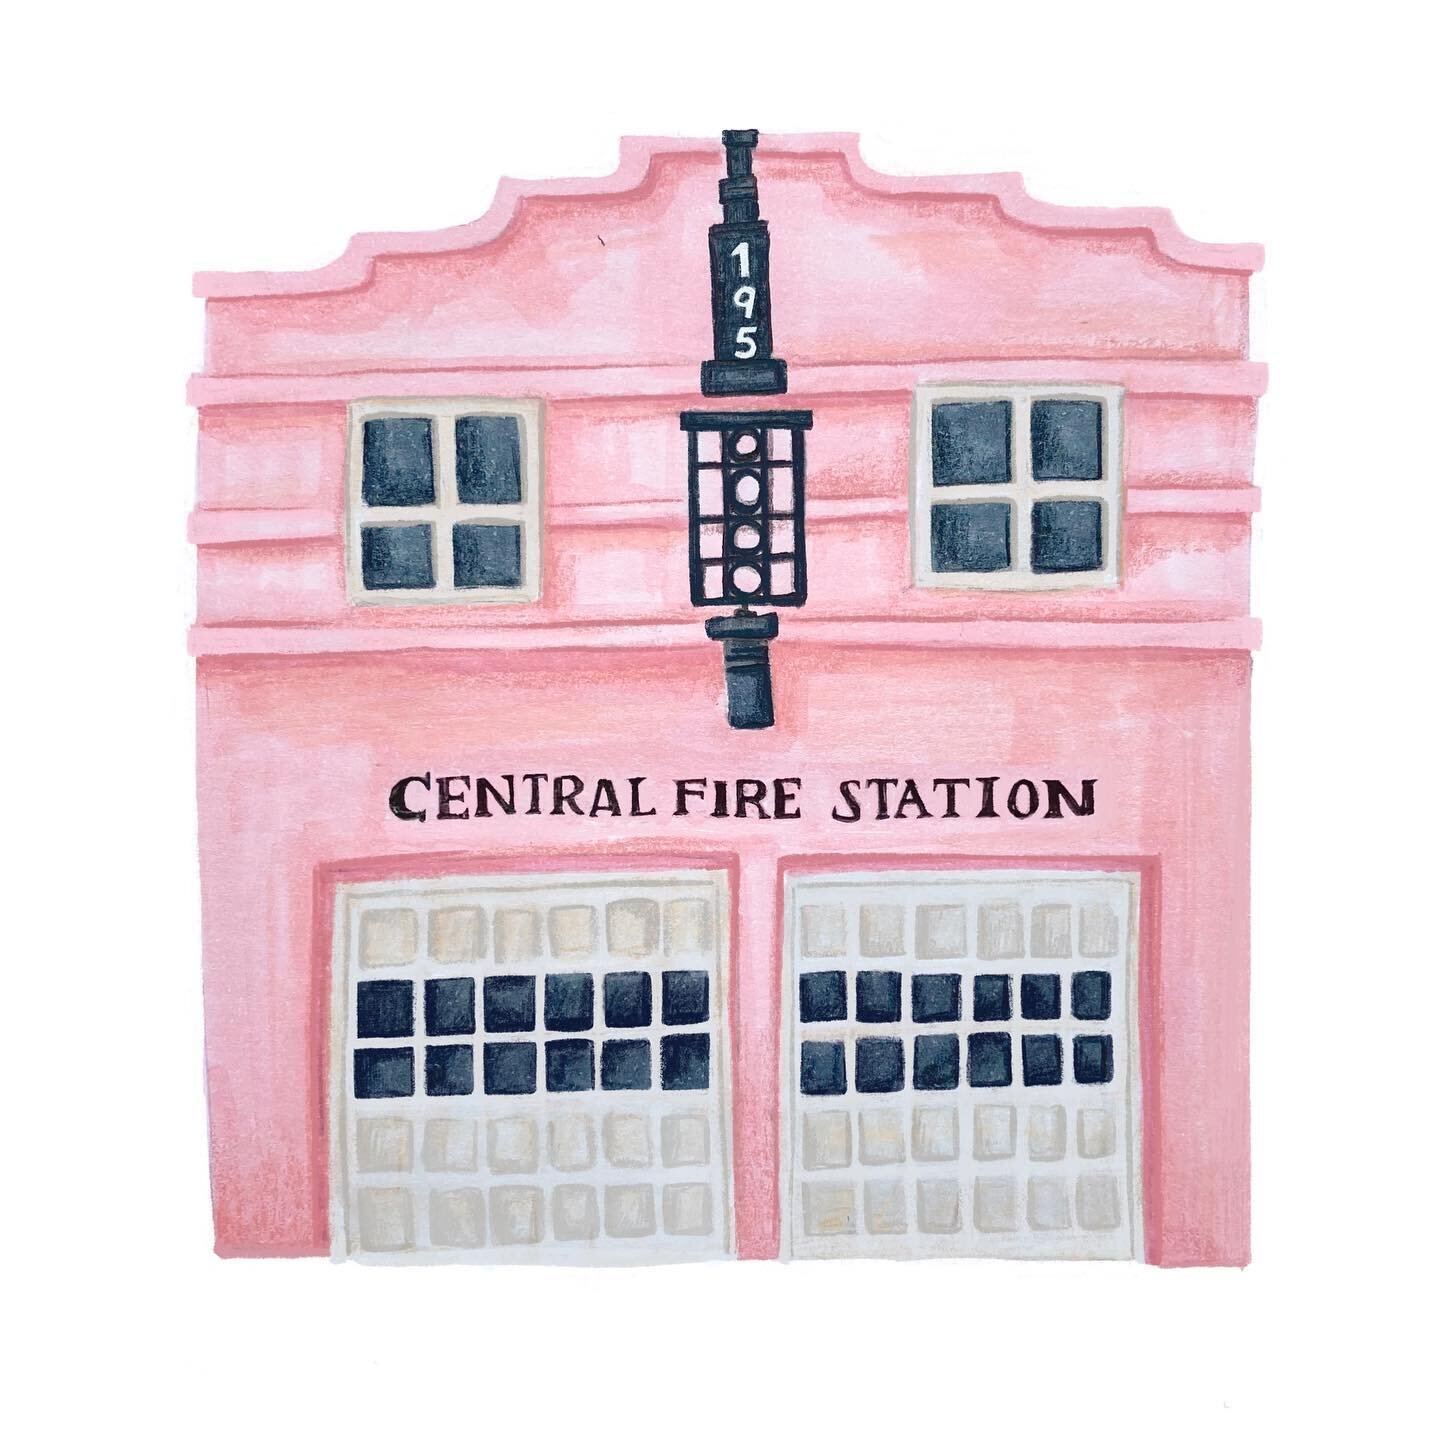 Have been obsessing over Wes Anderson aesthetics recently, maybe it&rsquo;s because I&rsquo;ve been seeing that wes Anderson challenge going around. So today I drew this sweet converted old fire station in Texas which is now an artist hub. If I find 